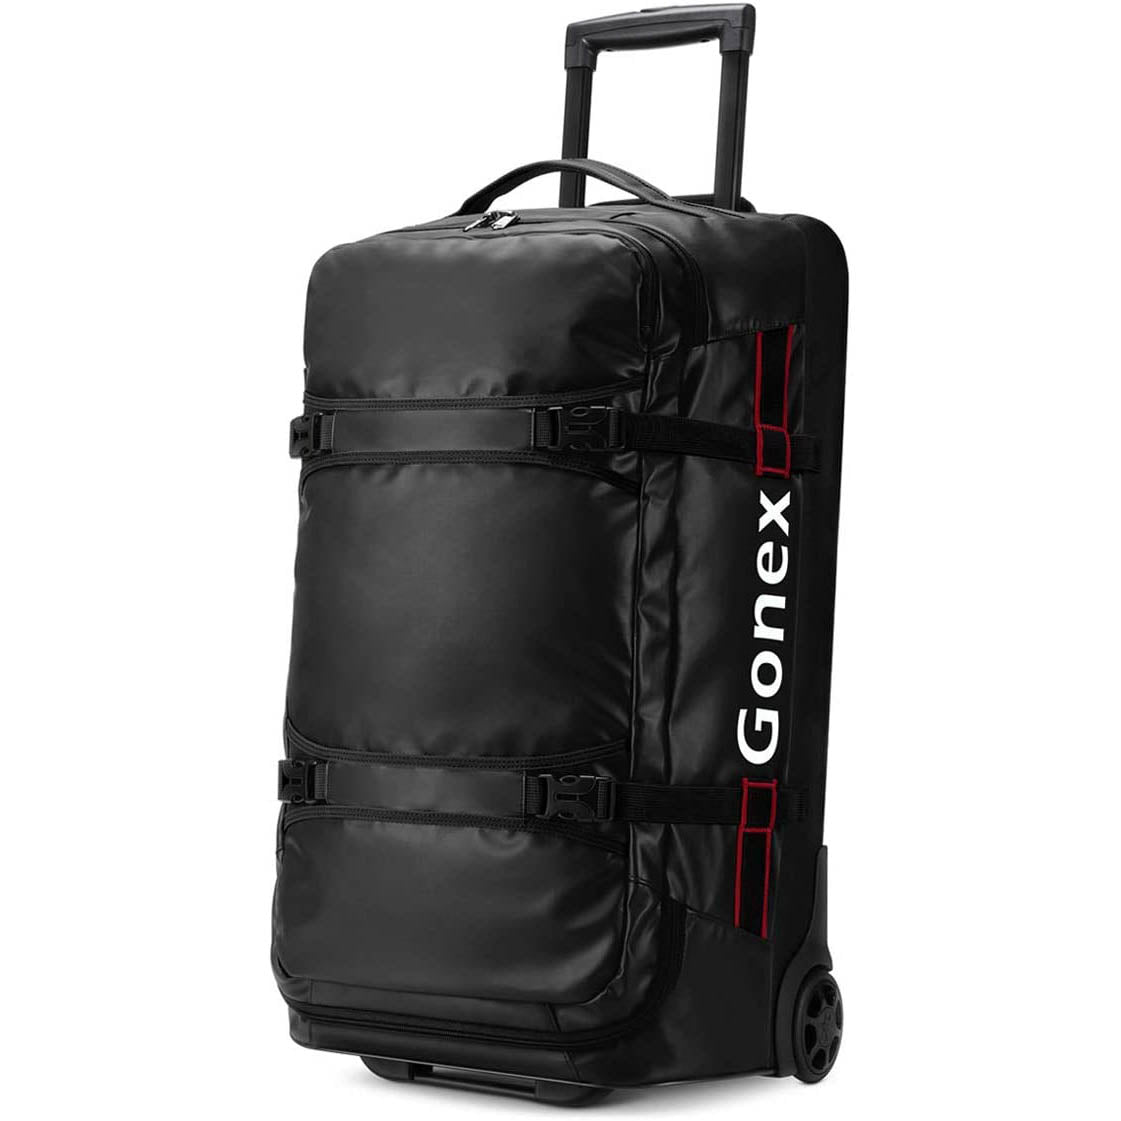 Gonex rolling duffle bag with wheels for women